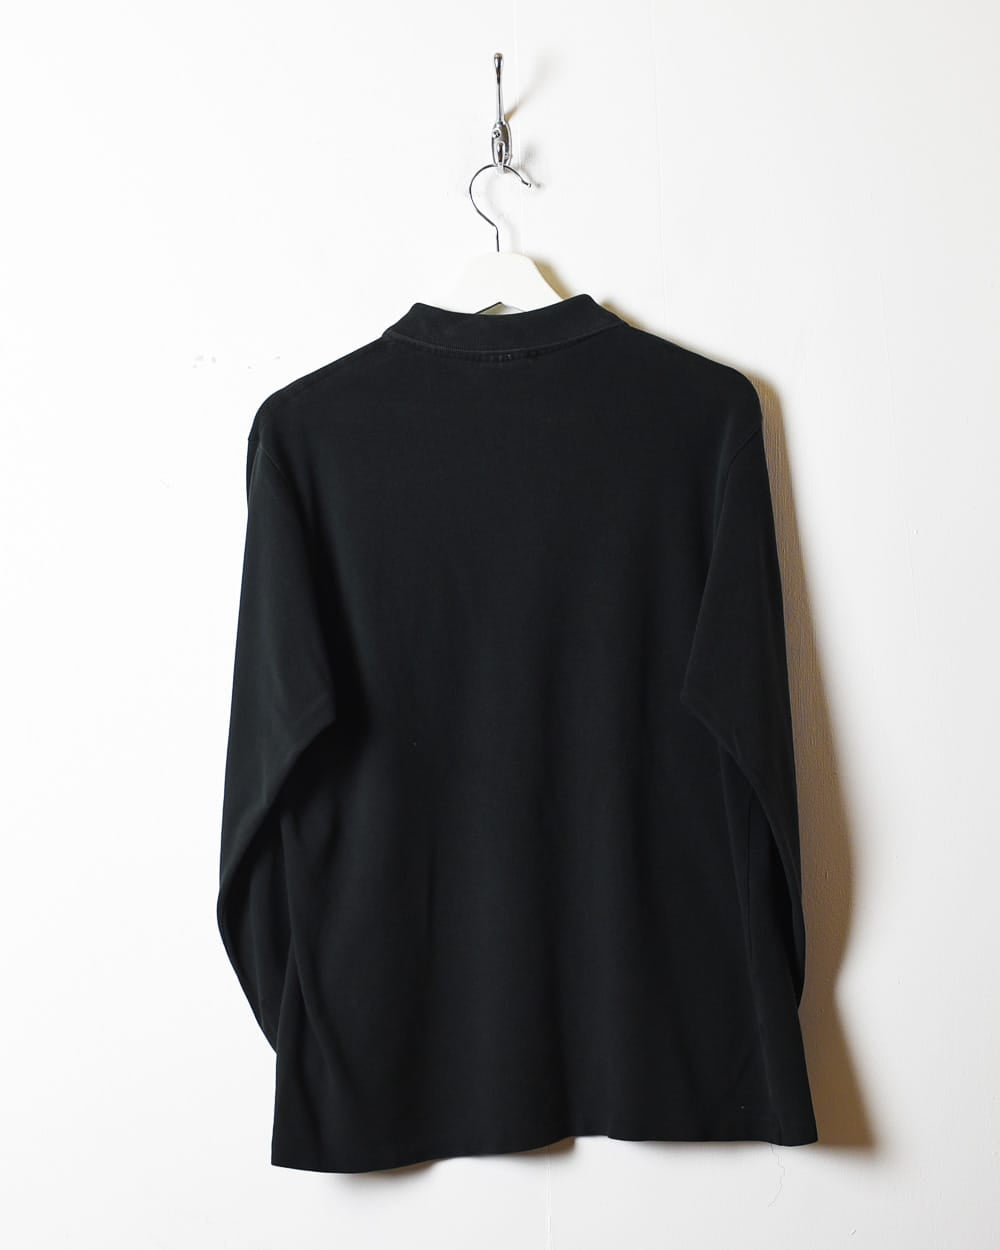 Black Lacoste Long Sleeved Polo Shirt - Small